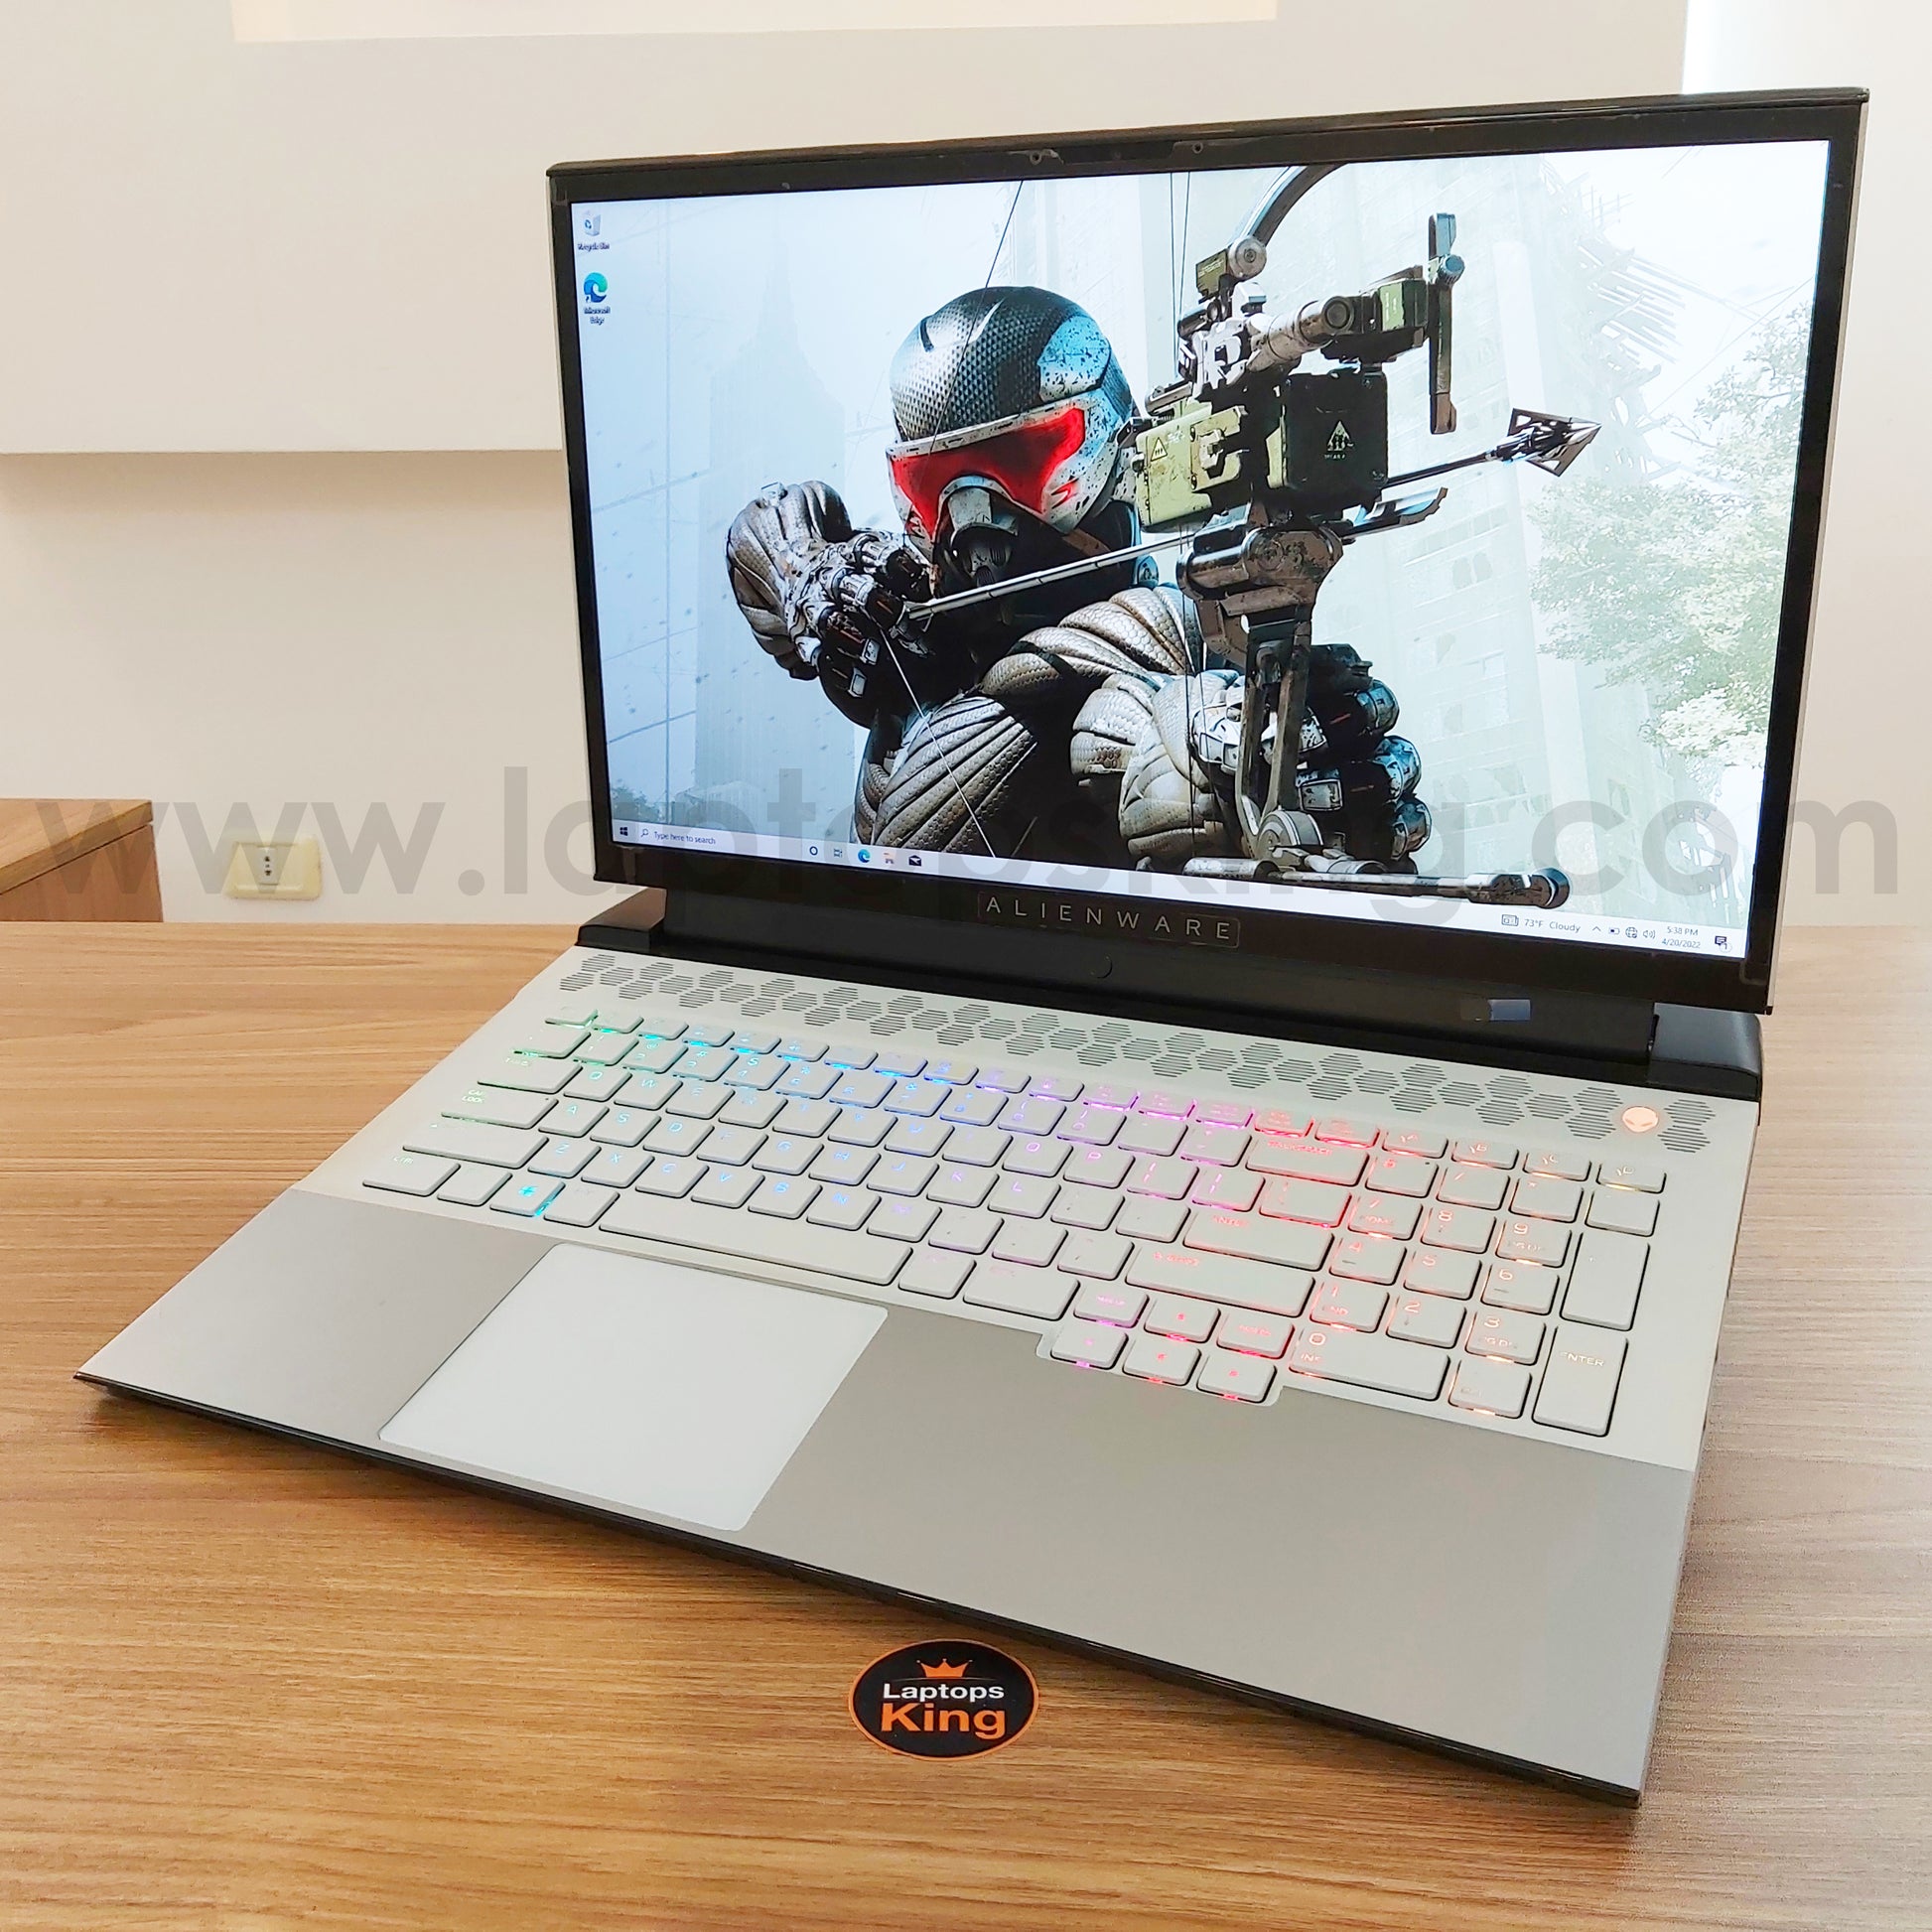 Alienware M17 i9-9980hk RTX 2080 17.3" 144Hz Gaming Laptop (Slightly Used Very Clean) Gaming laptop, Graphic Design laptop, best laptop for gaming, Best laptop for graphic design, computer for sale Lebanon, laptop for video editing in Lebanon, laptop for sale Lebanon, Best graphic design laptop,	Best video editing laptop, Best programming laptop, laptop for sale in Lebanon, laptops for sale in Lebanon, laptop for sale in Lebanon, buy computer Lebanon, buy laptop Lebanon.